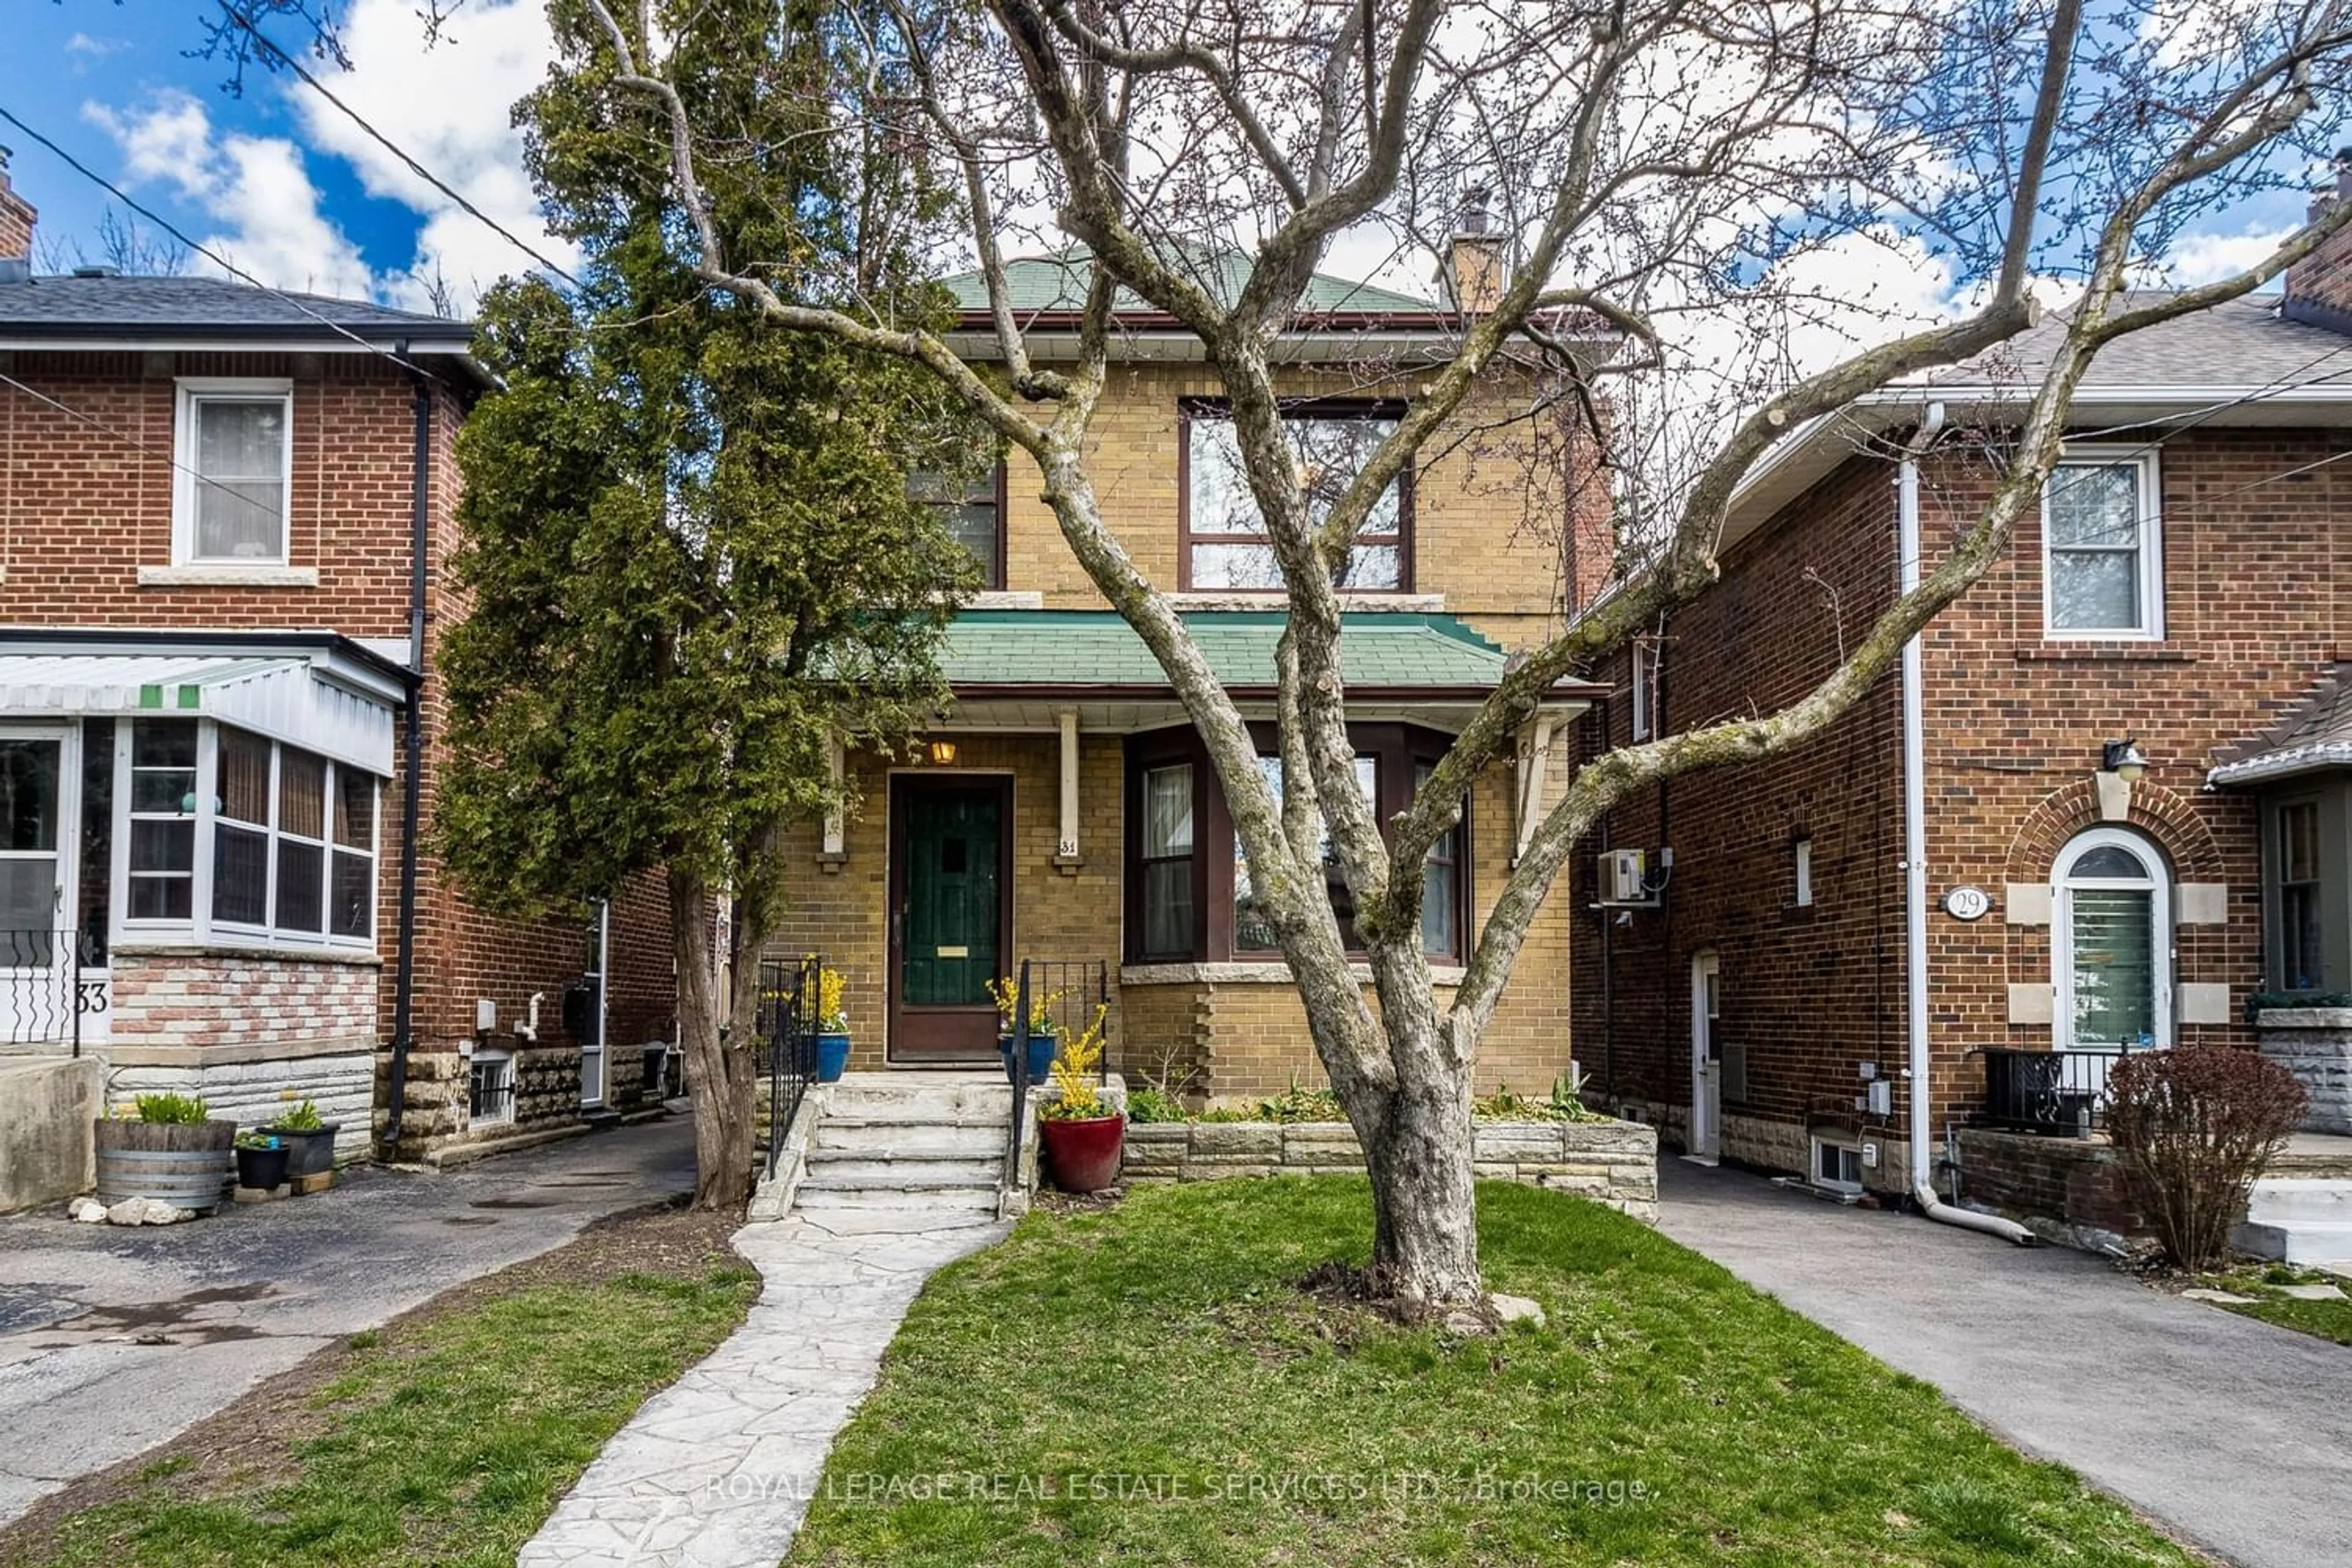 Home with brick exterior material for 31 Albert Ave, Toronto Ontario M8V 2L6